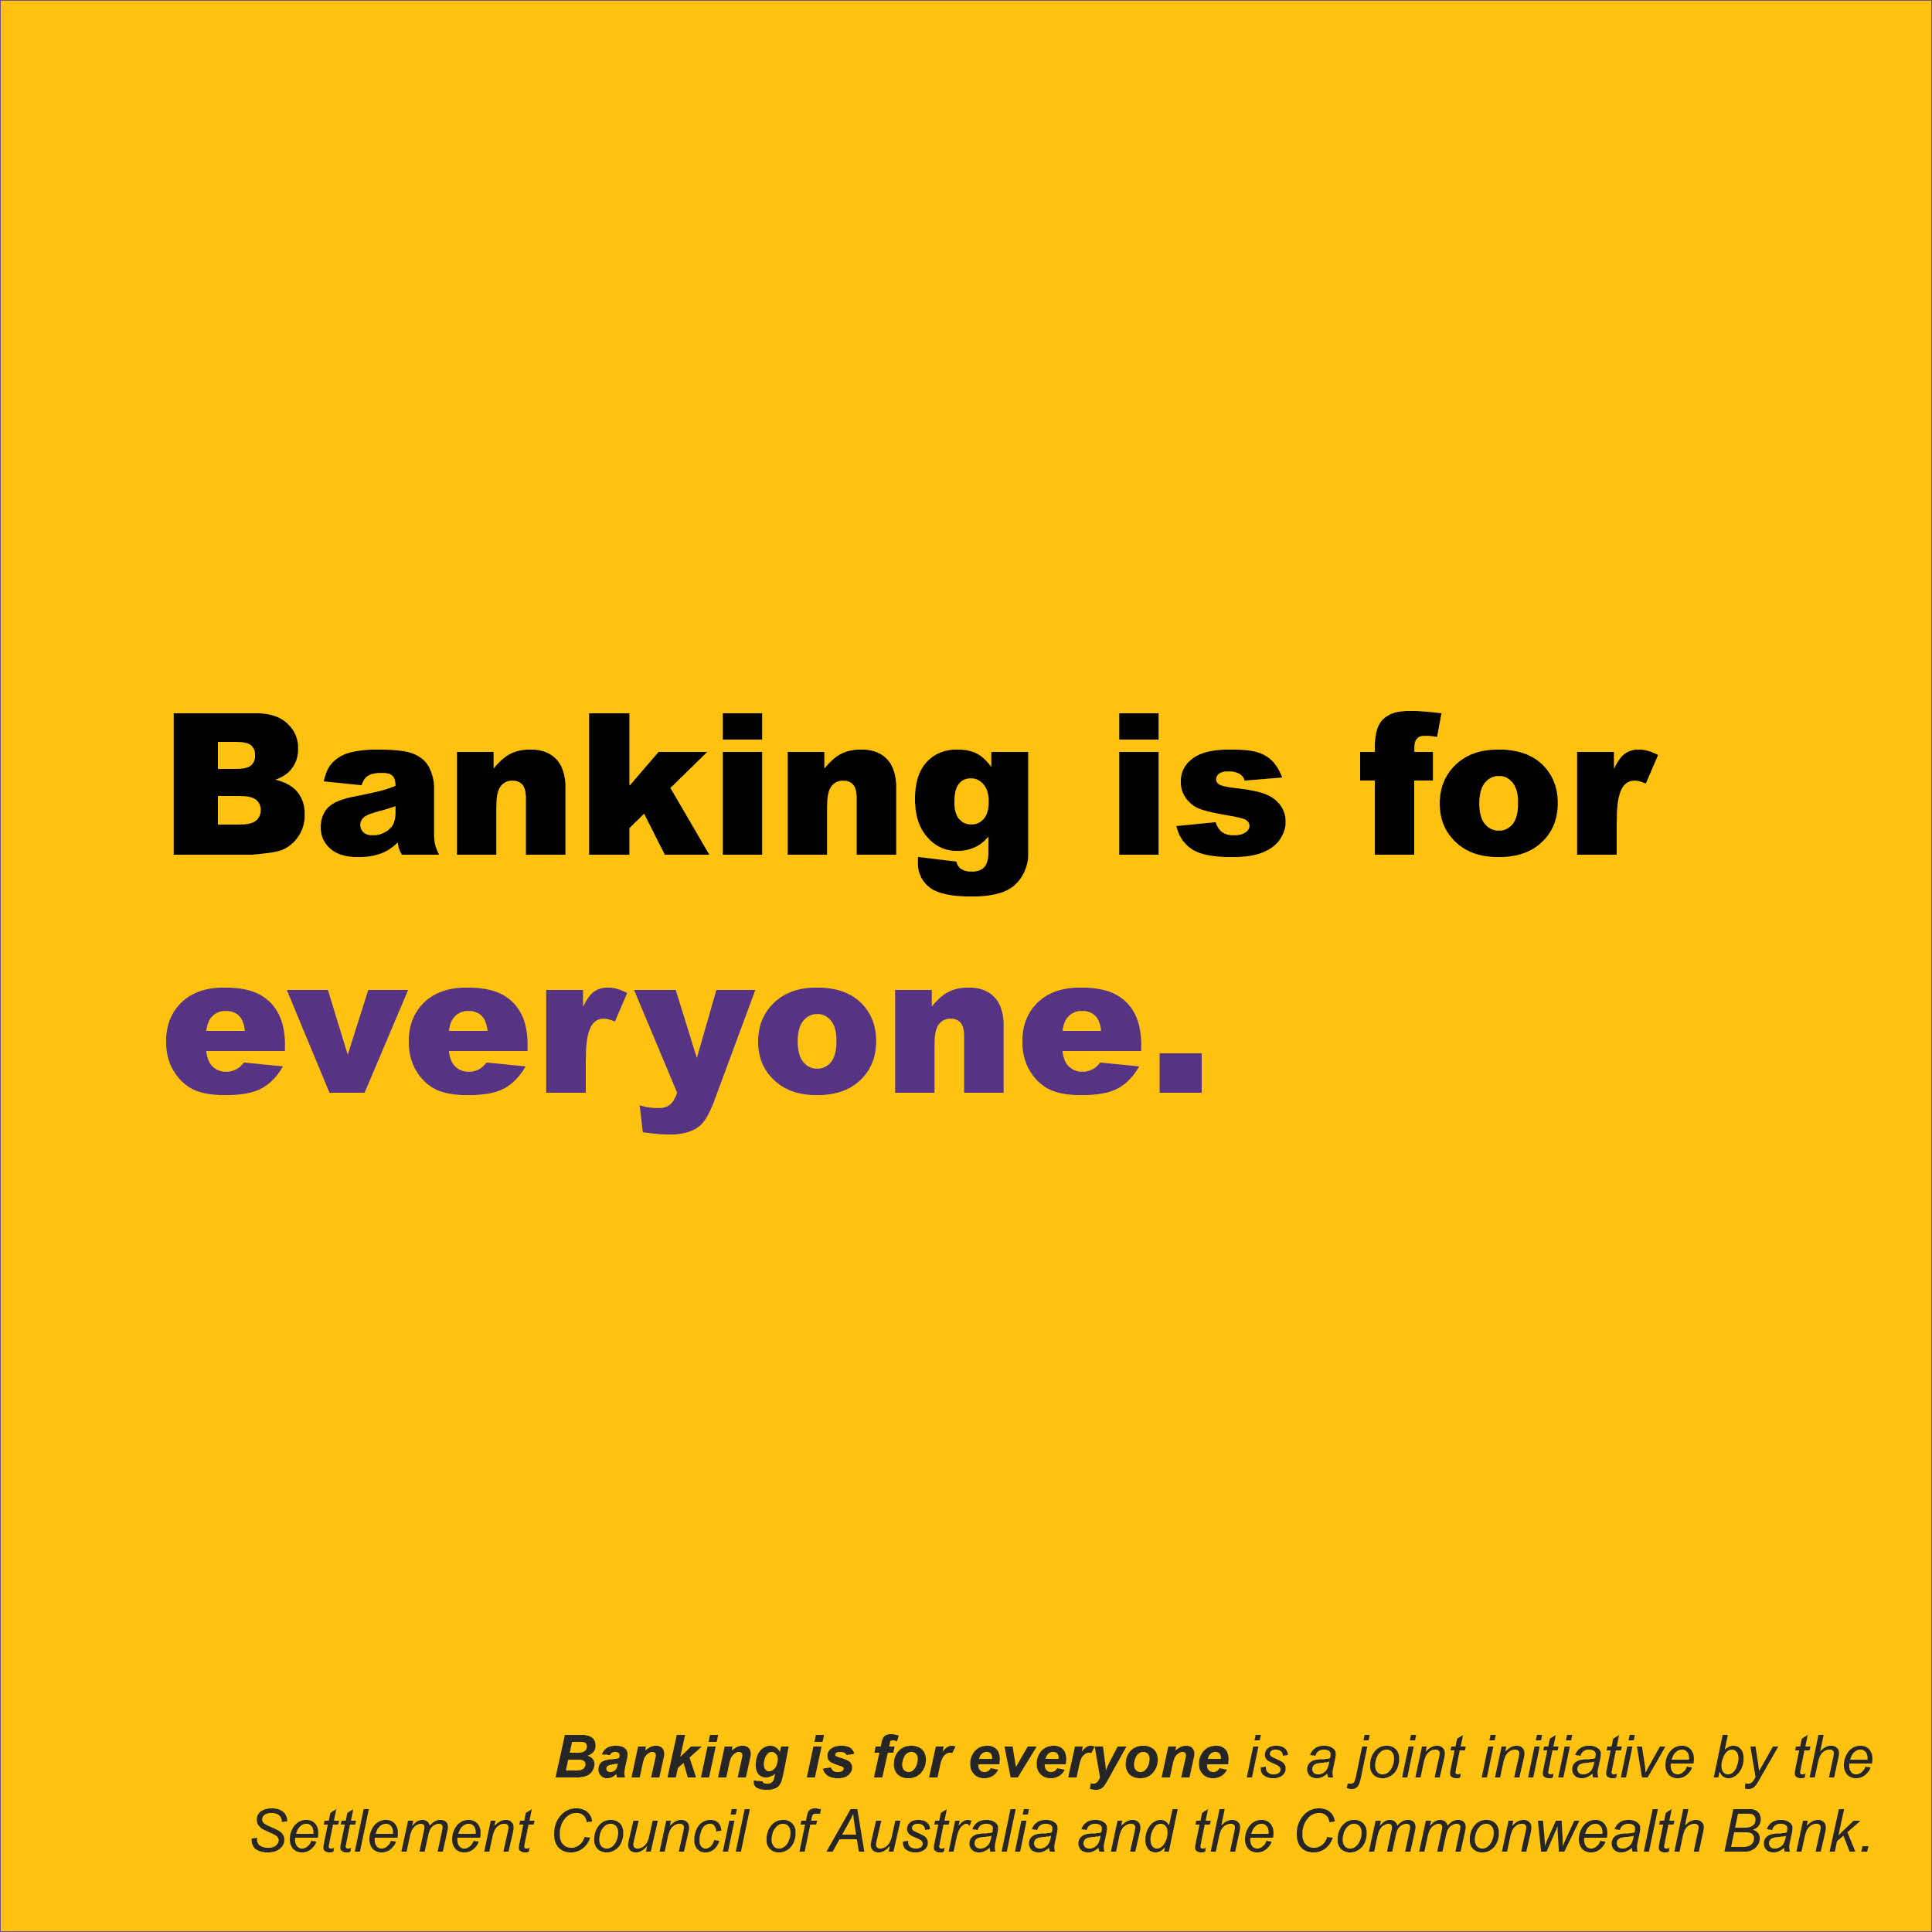 A Square yellow background with the words Banking is for Everyone in large print and then smaller text at the bottom that says Banking is for everyone is a joint initiative by the Settlement Council of Australia and the Commonwealth Bank.